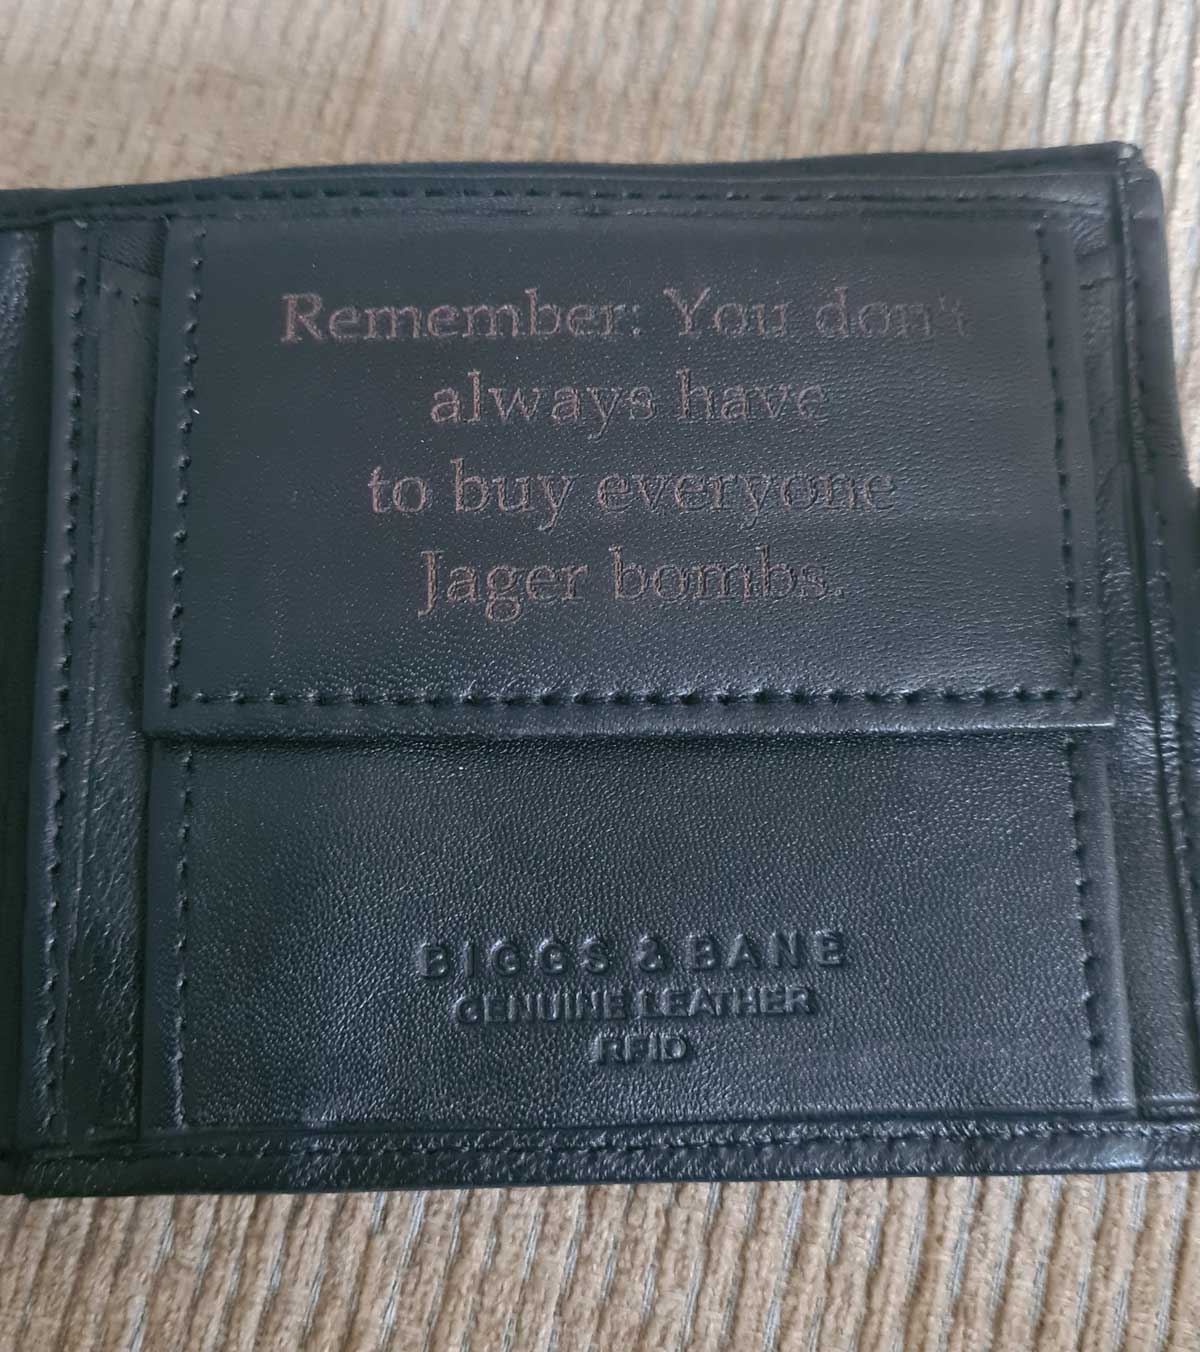 Got myself a new wallet with a little reminder inside it